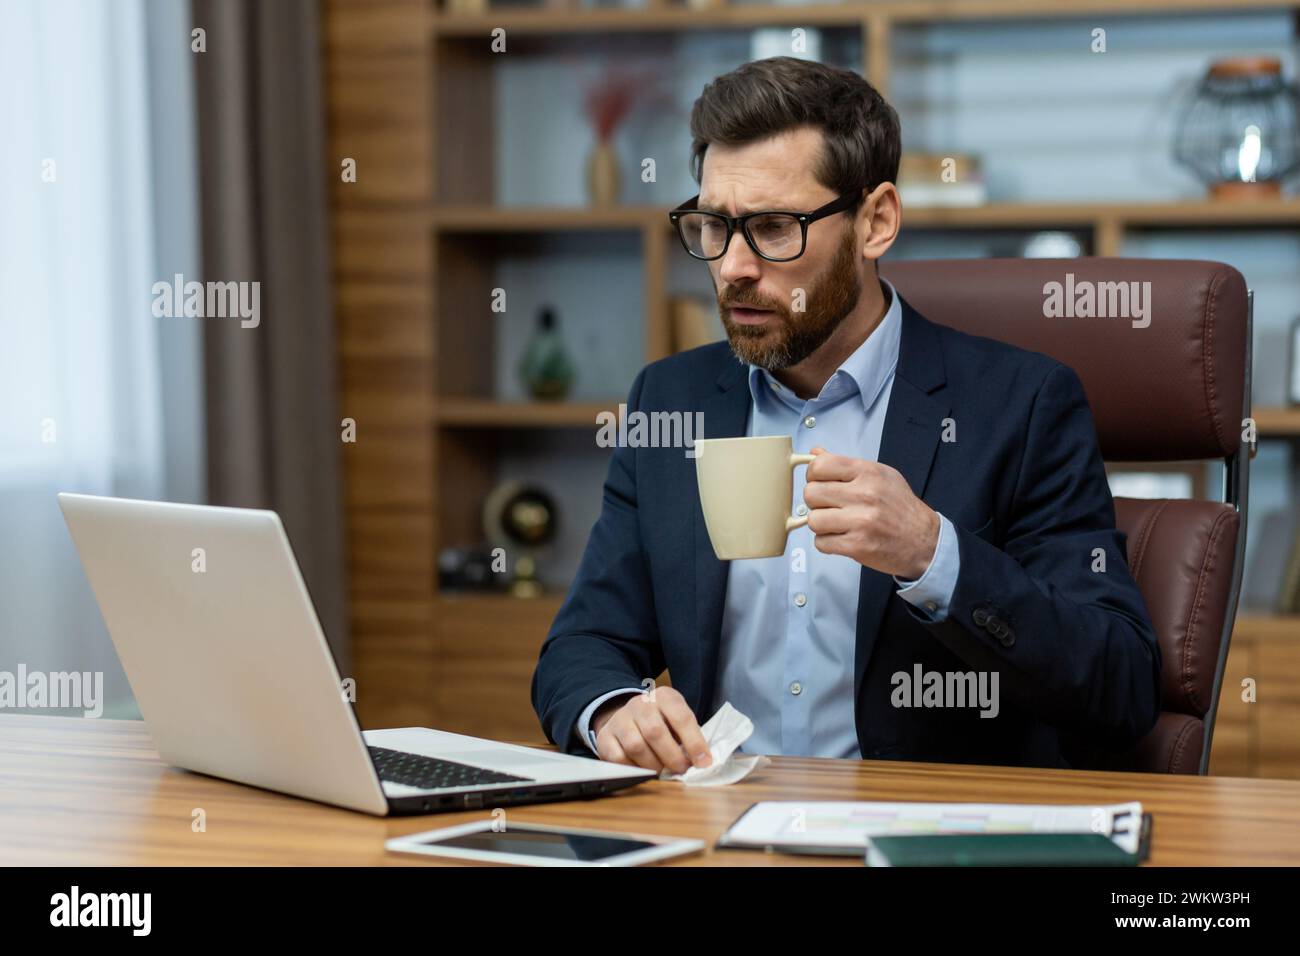 Serious and shocked young man working in the office, sitting at the desk, holding a cup with a drink in his hand and looking worriedly at the laptop s Stock Photo